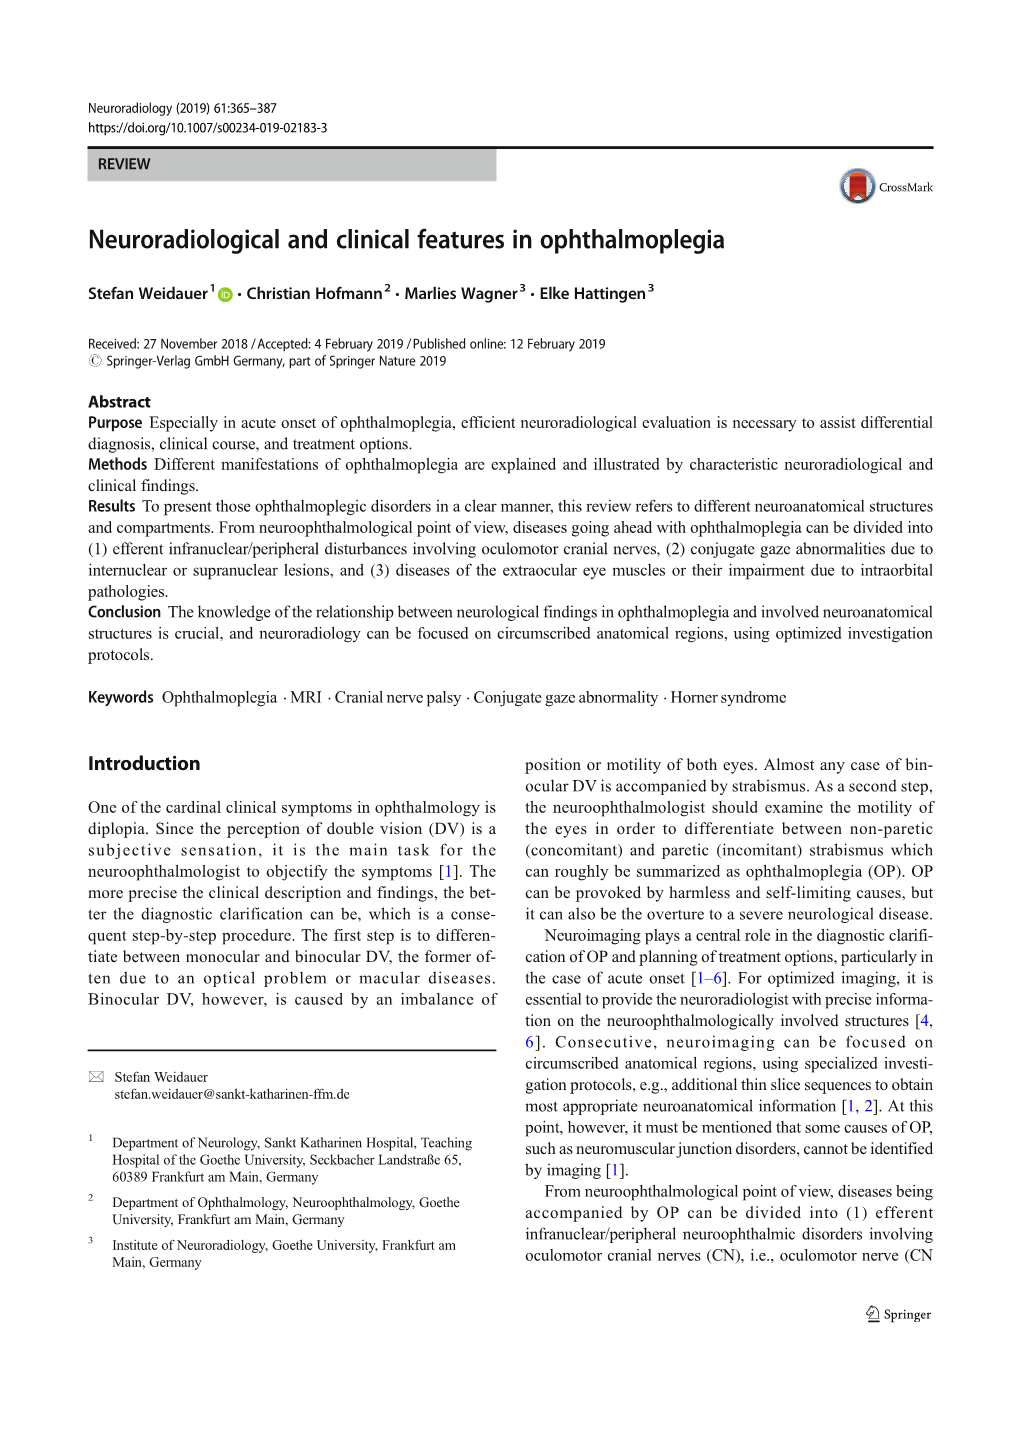 Neuroradiological and Clinical Features in Ophthalmoplegia